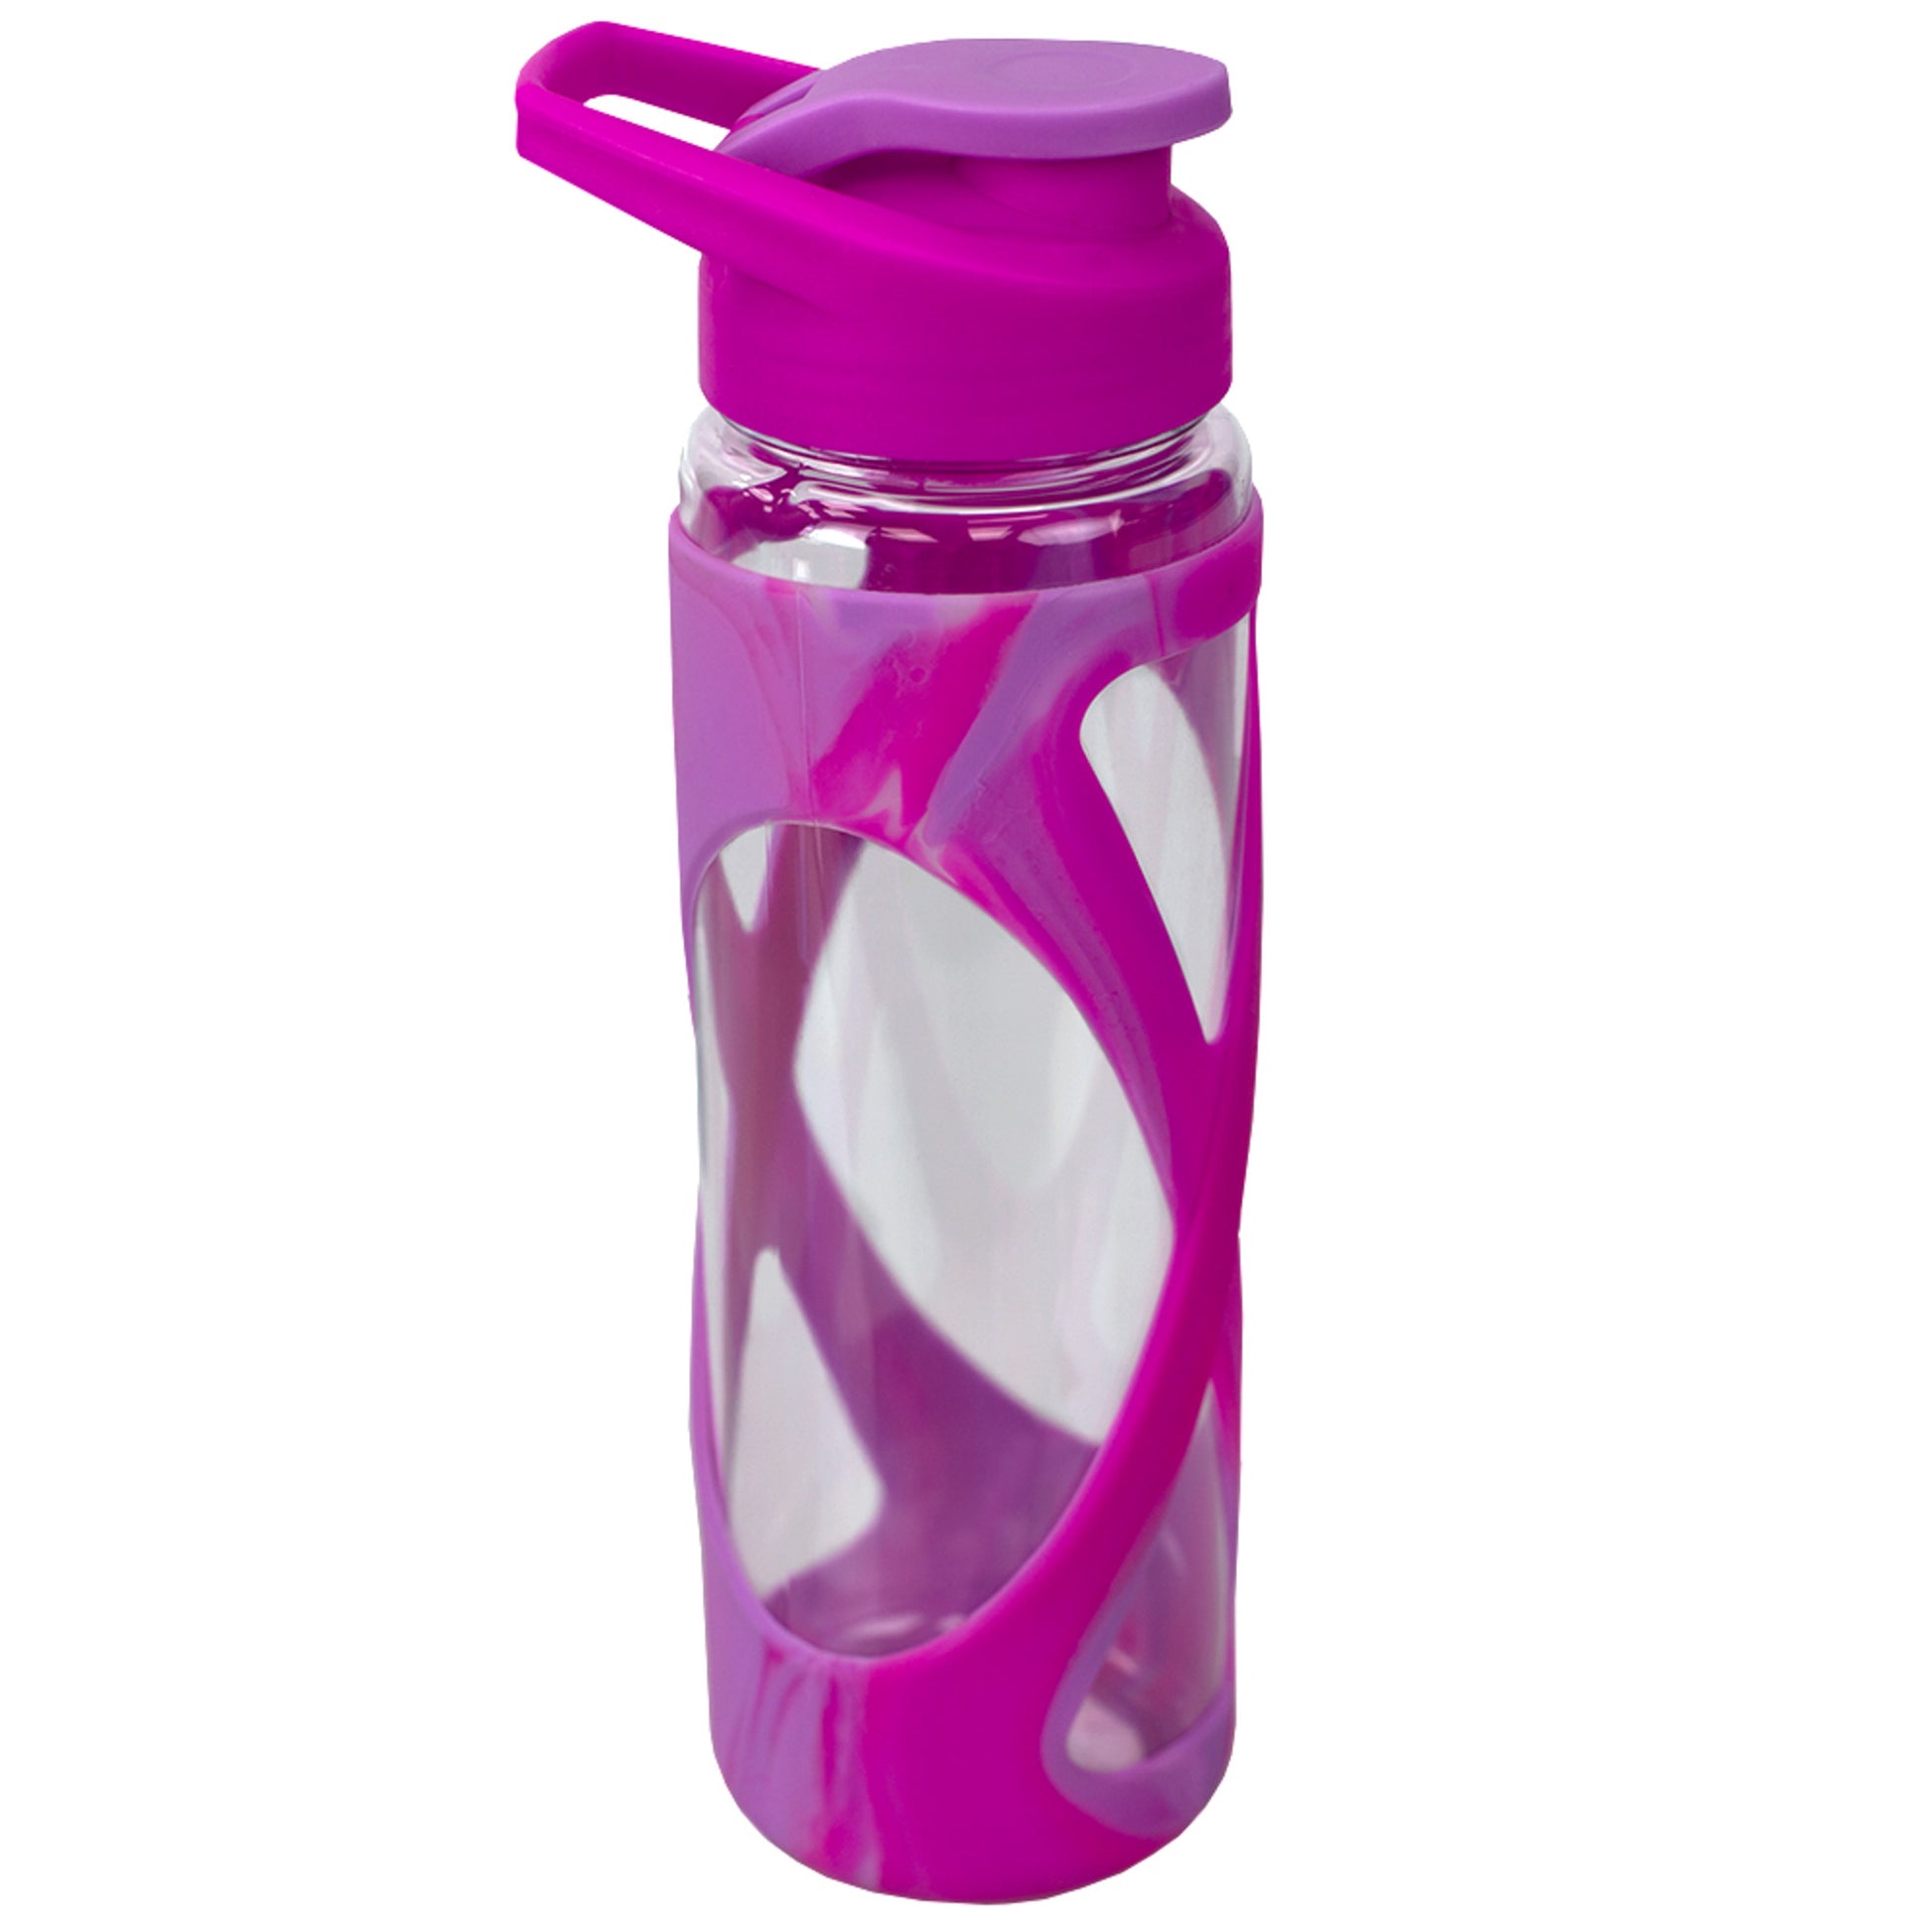 Home Basics 17 oz. Silicone Sleeve Water Bottle, Pink - Pink